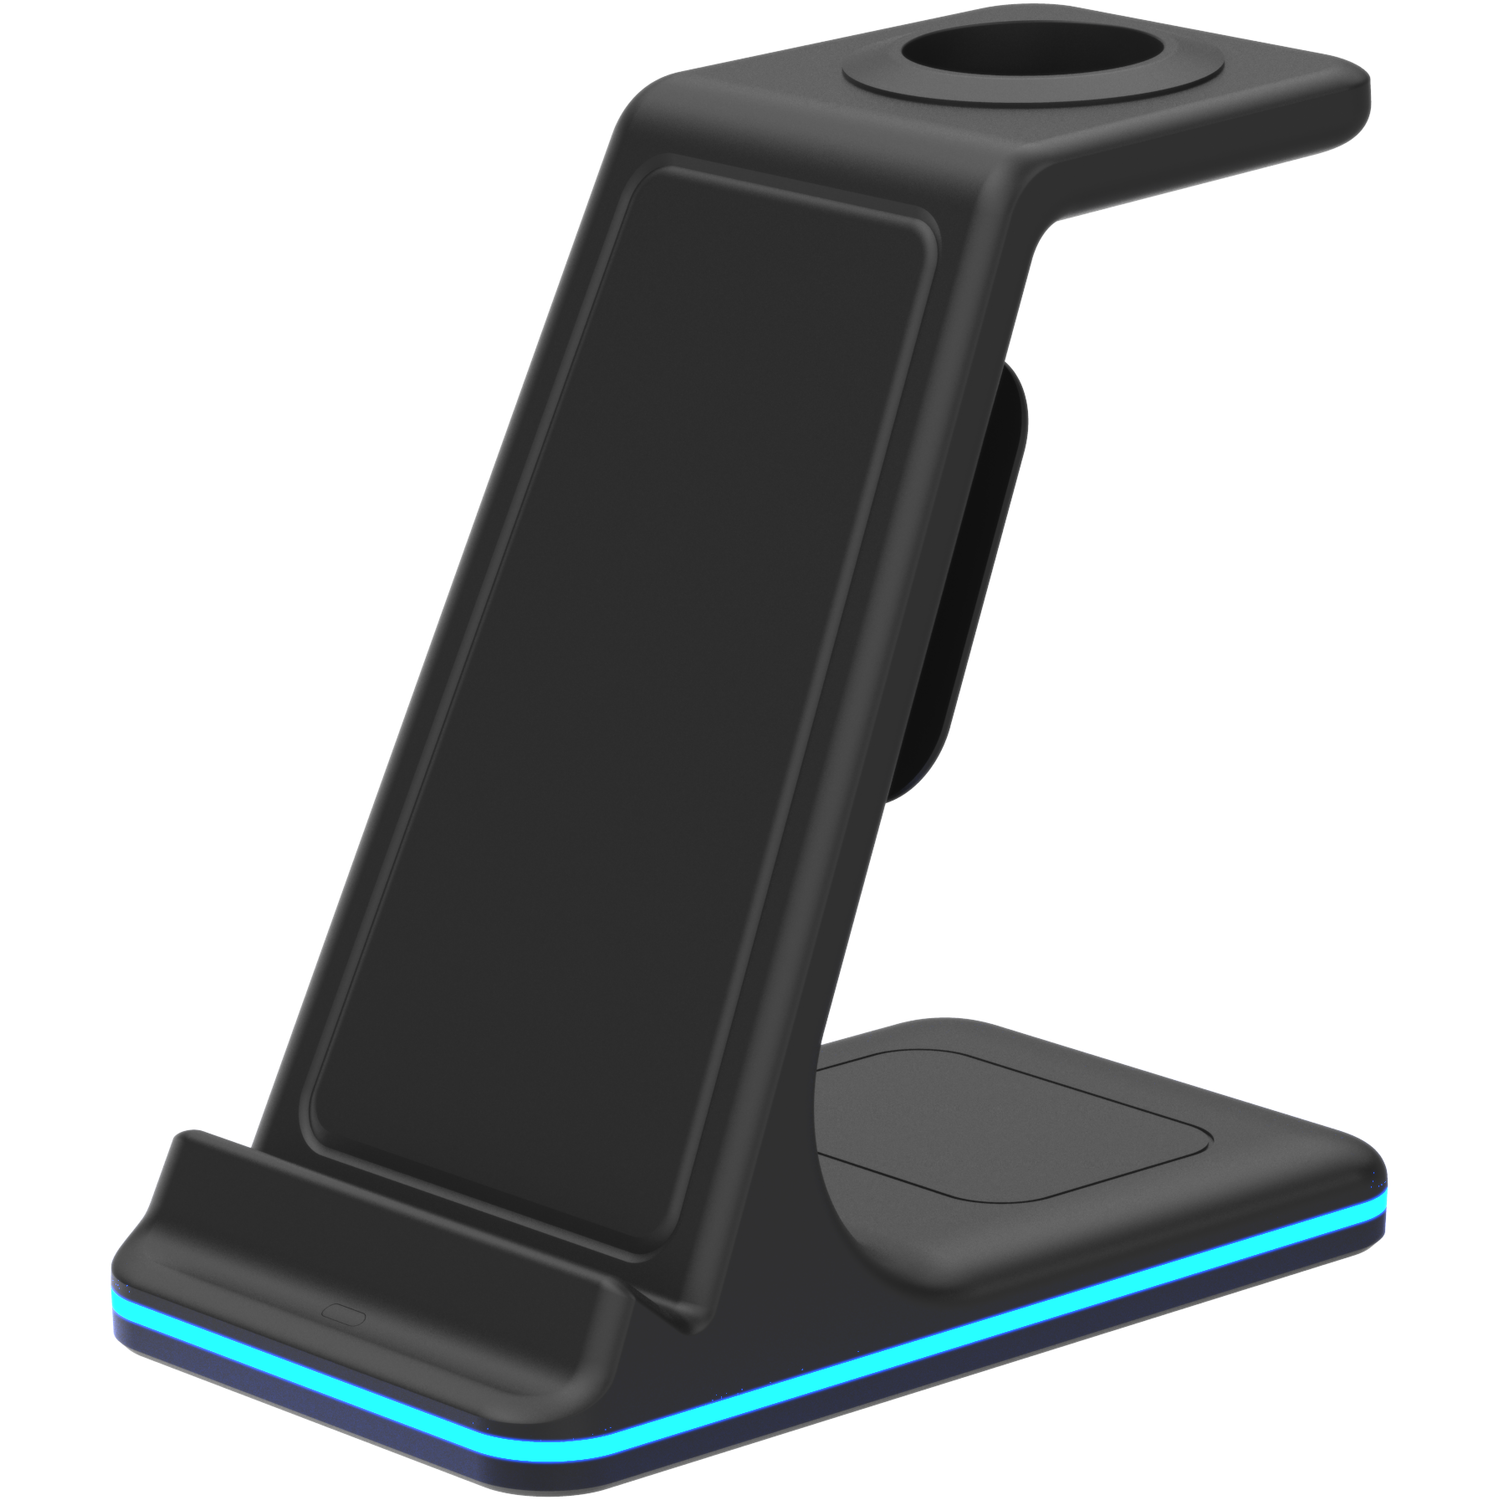 3 in 1 Black Wireless Adaptor and Charging Stand Image 3